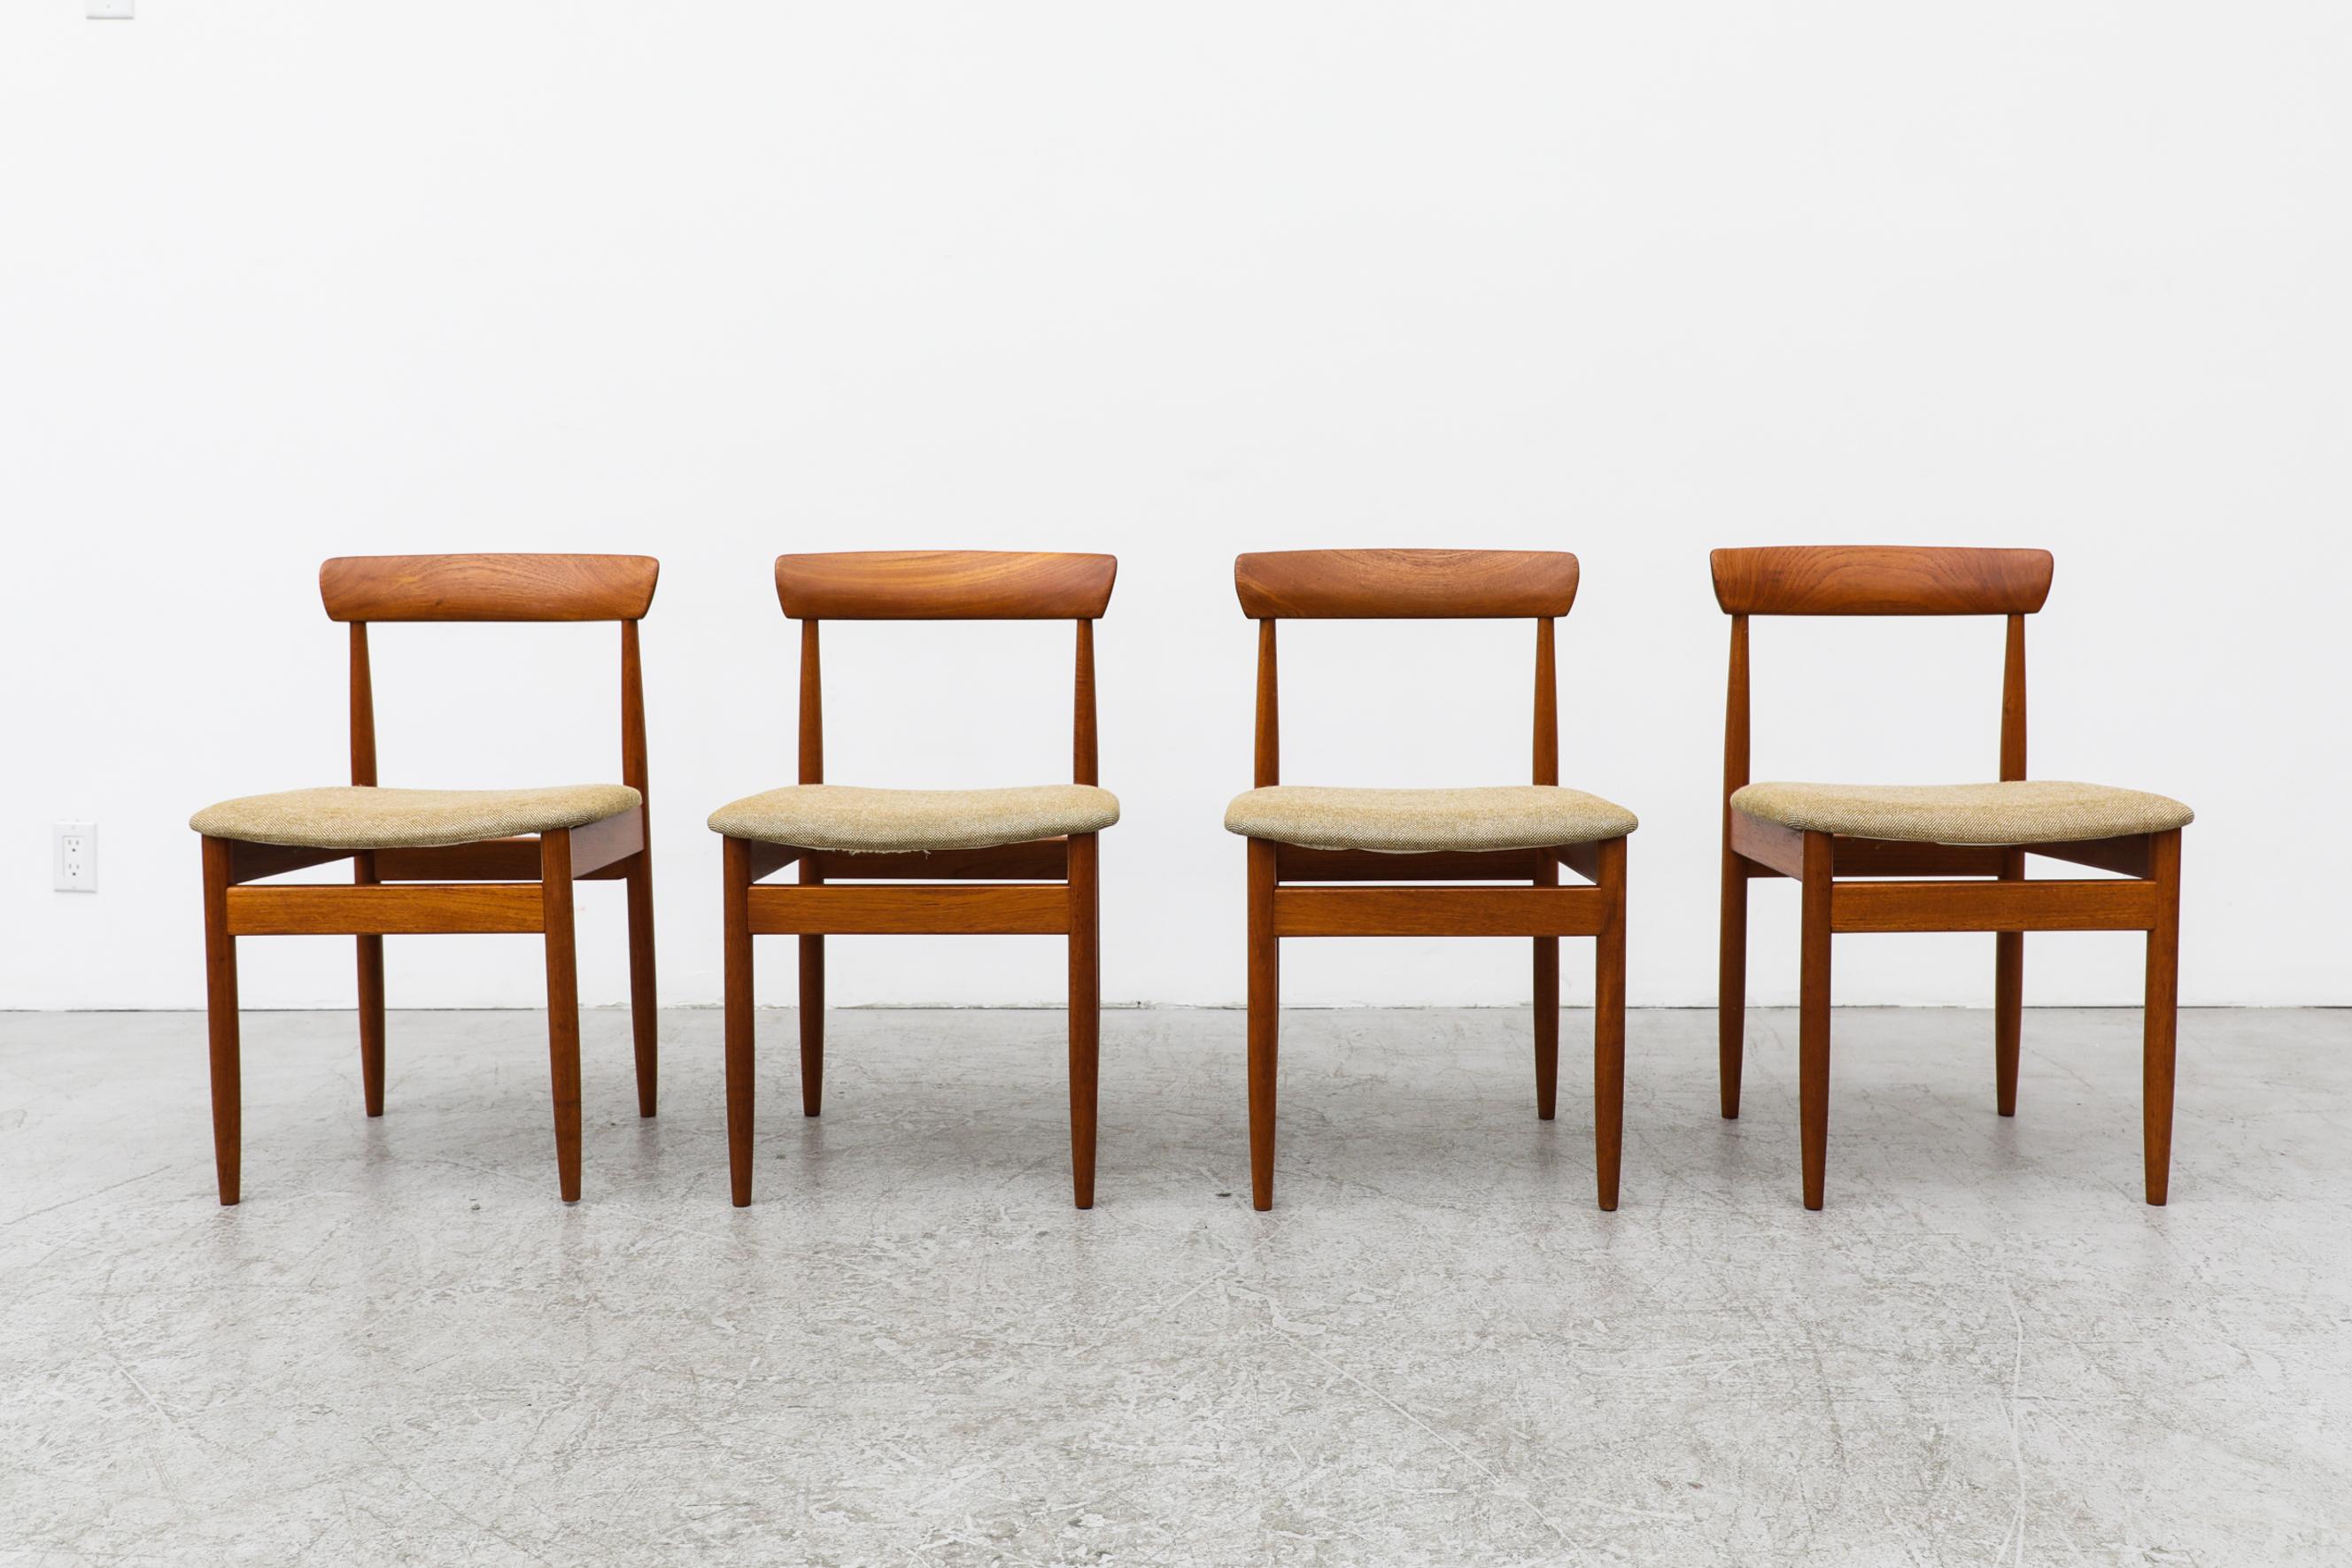 Set of 4 Mid-Century teak side chairs with thin carved teak backrests and newer beige upholstered seats by German manufacturer Inter Lübke. In original condition with some minor scratches and wear, consistent with their age and use.